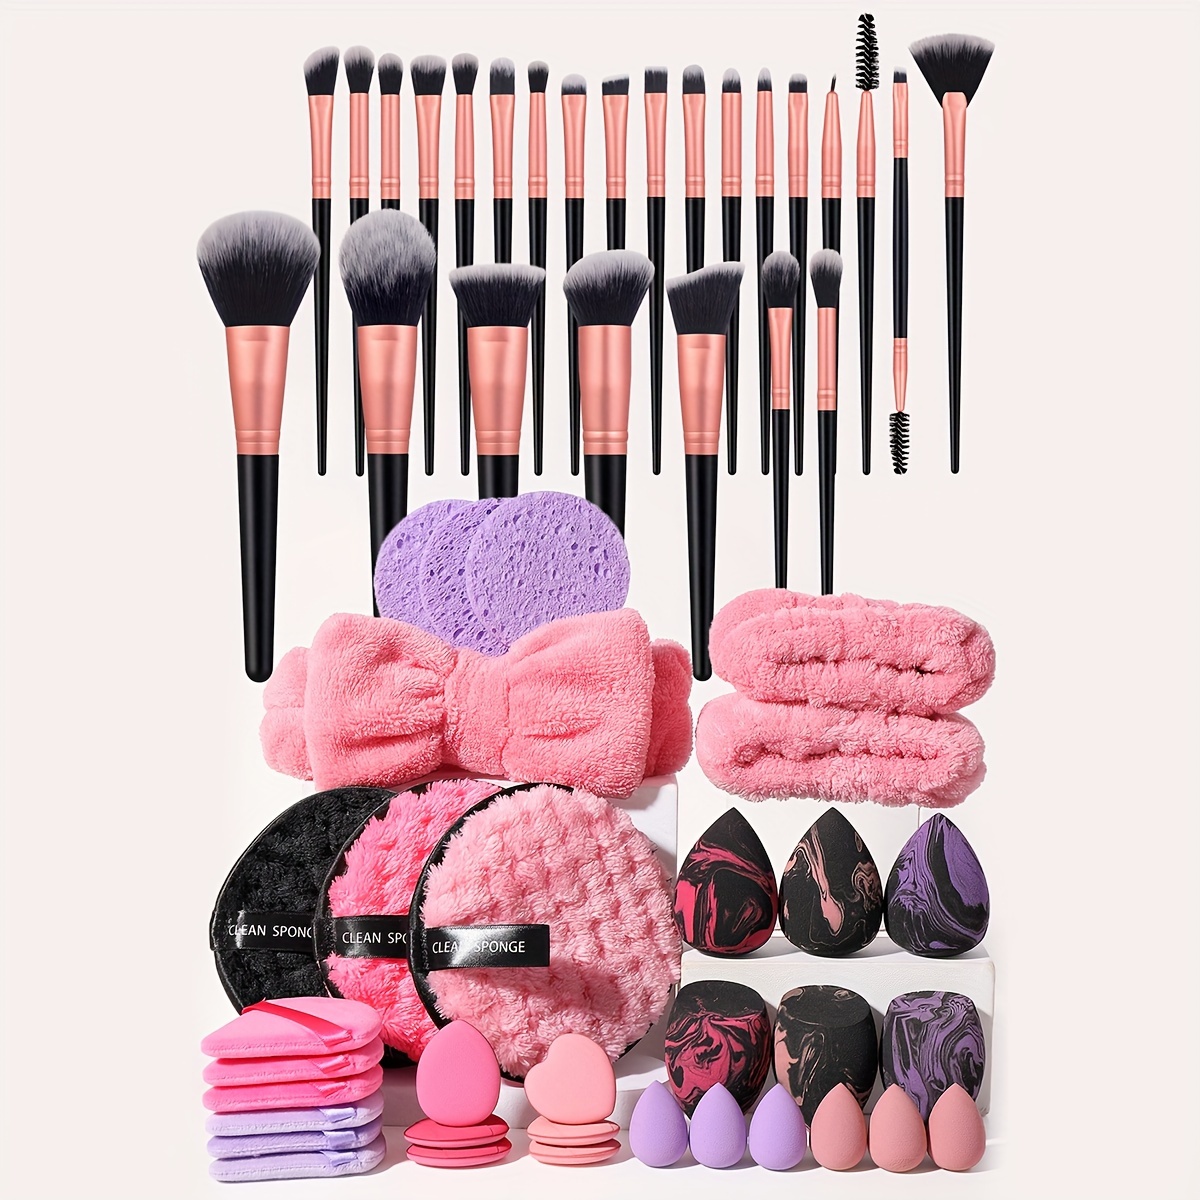 

25 Pcs Makeup Brushes And 33 Pcs Sponges Set With Hair Bands Kit, Hydrophilic Pu, Unscented, Suitable For Normal Skin - Multipurpose Beauty Tools For Flawless Makeup Application